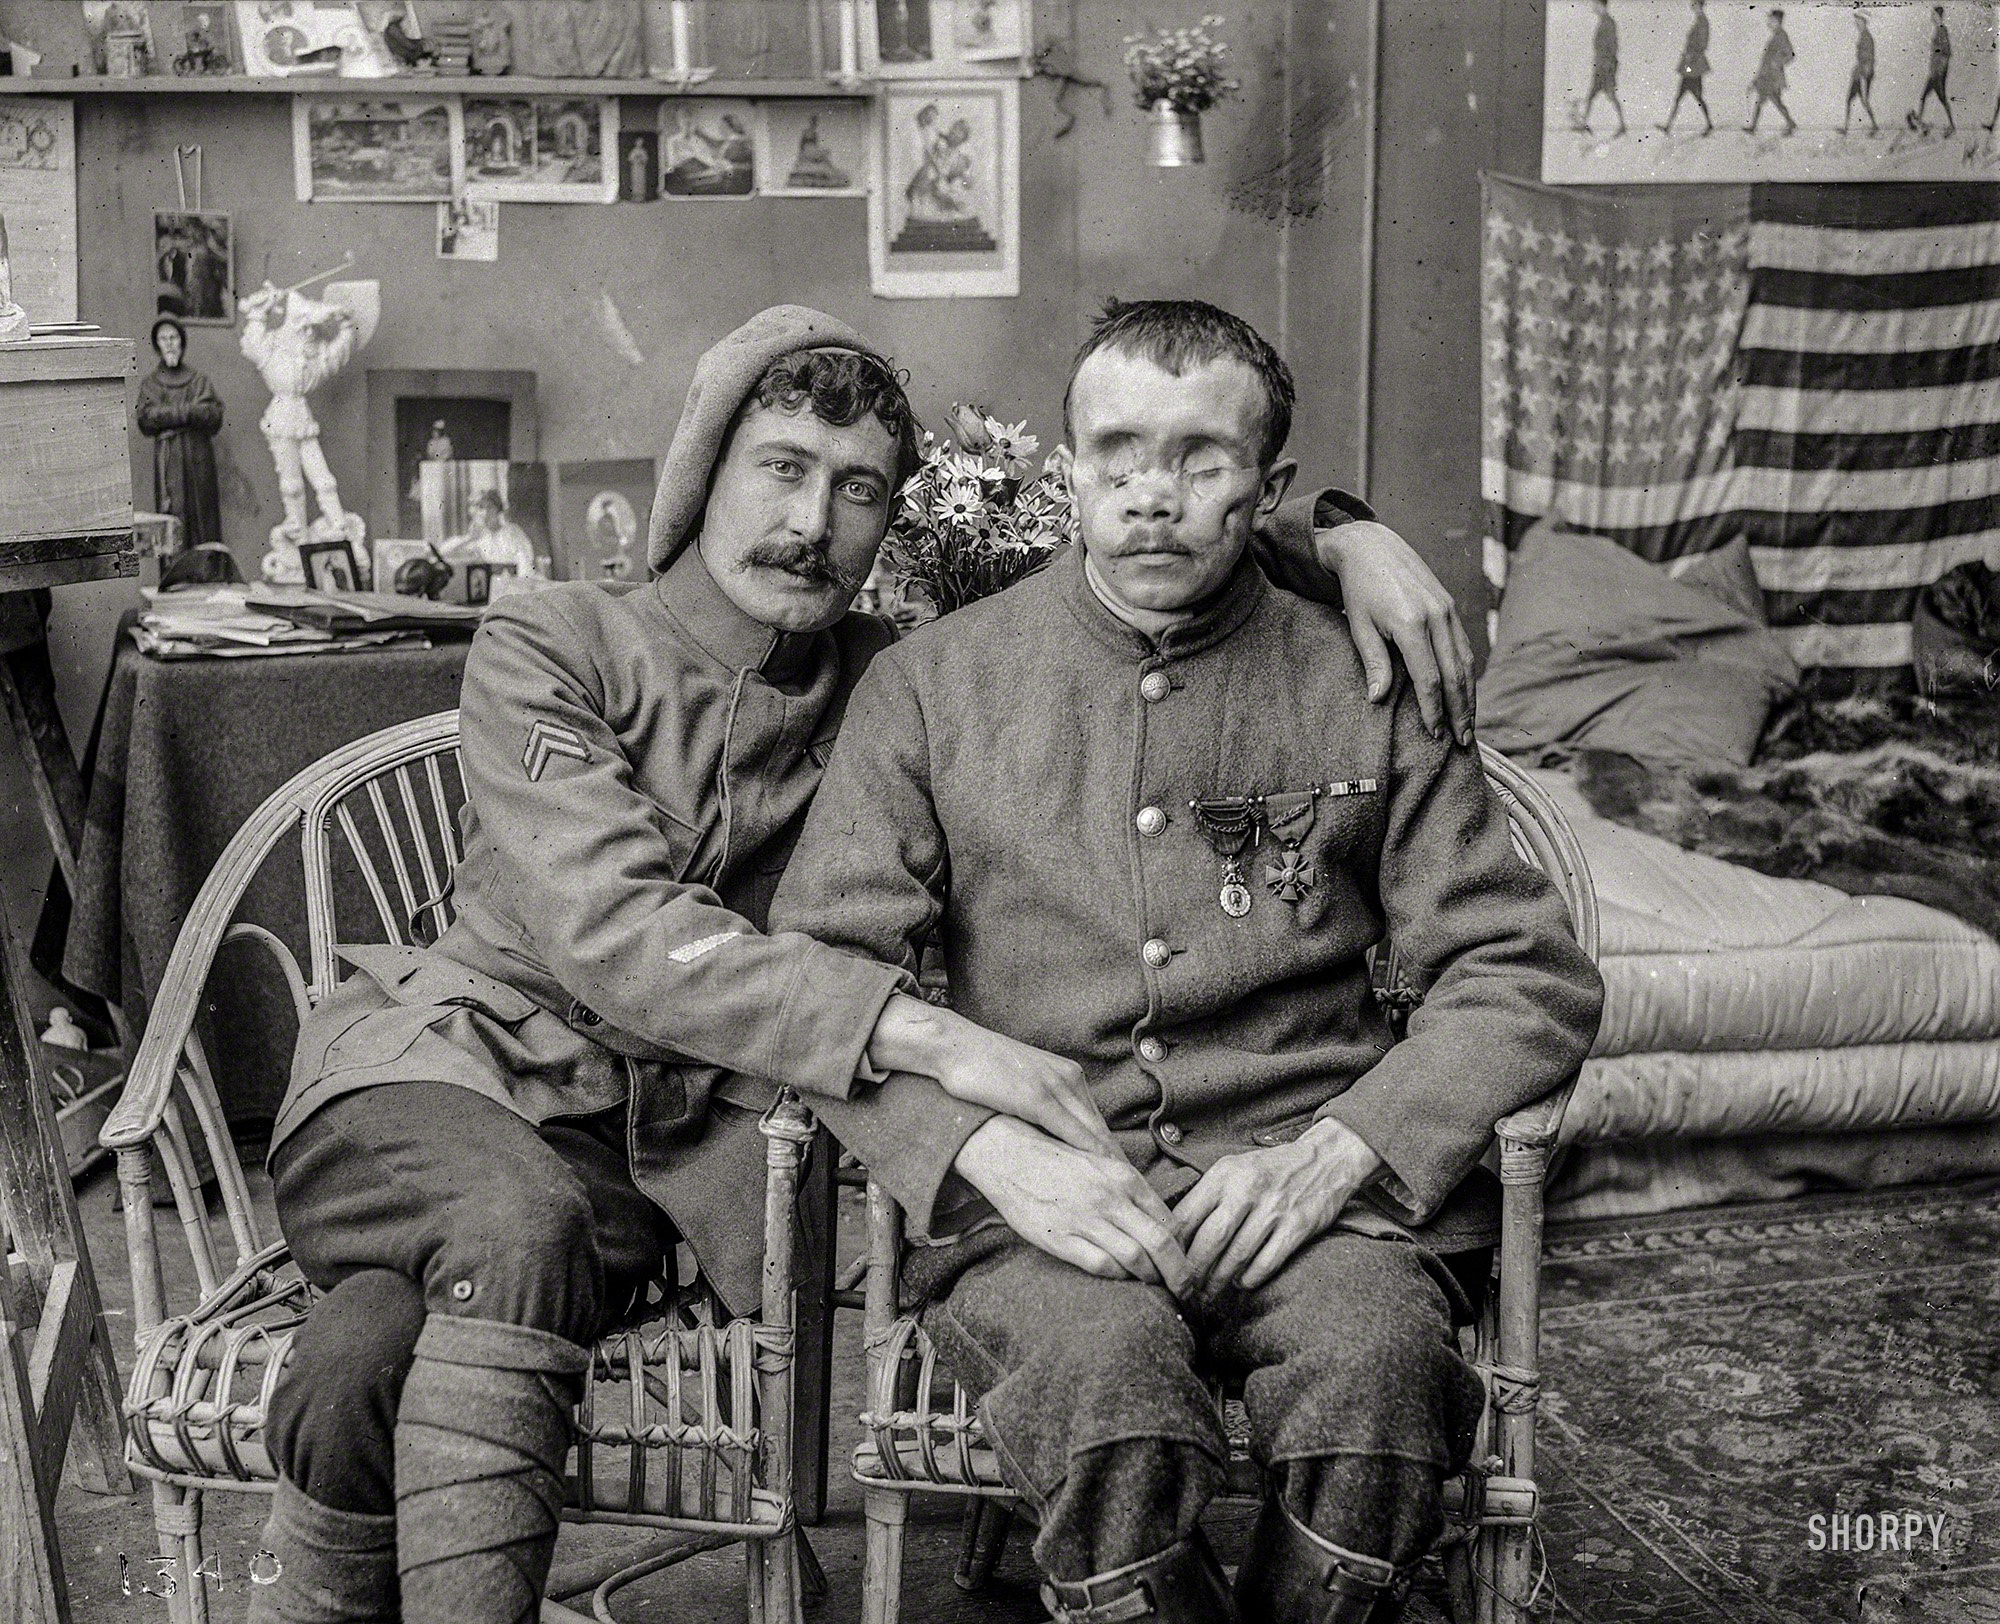 France. April 1918. "The horrible disfigured man of war can not cool the warmth of the friendship of his old comrade for Alexandre the blind mutile, but the Red Cross can not leave him without further aid." 5x7 glass negative from the American National Red Cross Photograph Collection, Library of Congress. View full size.